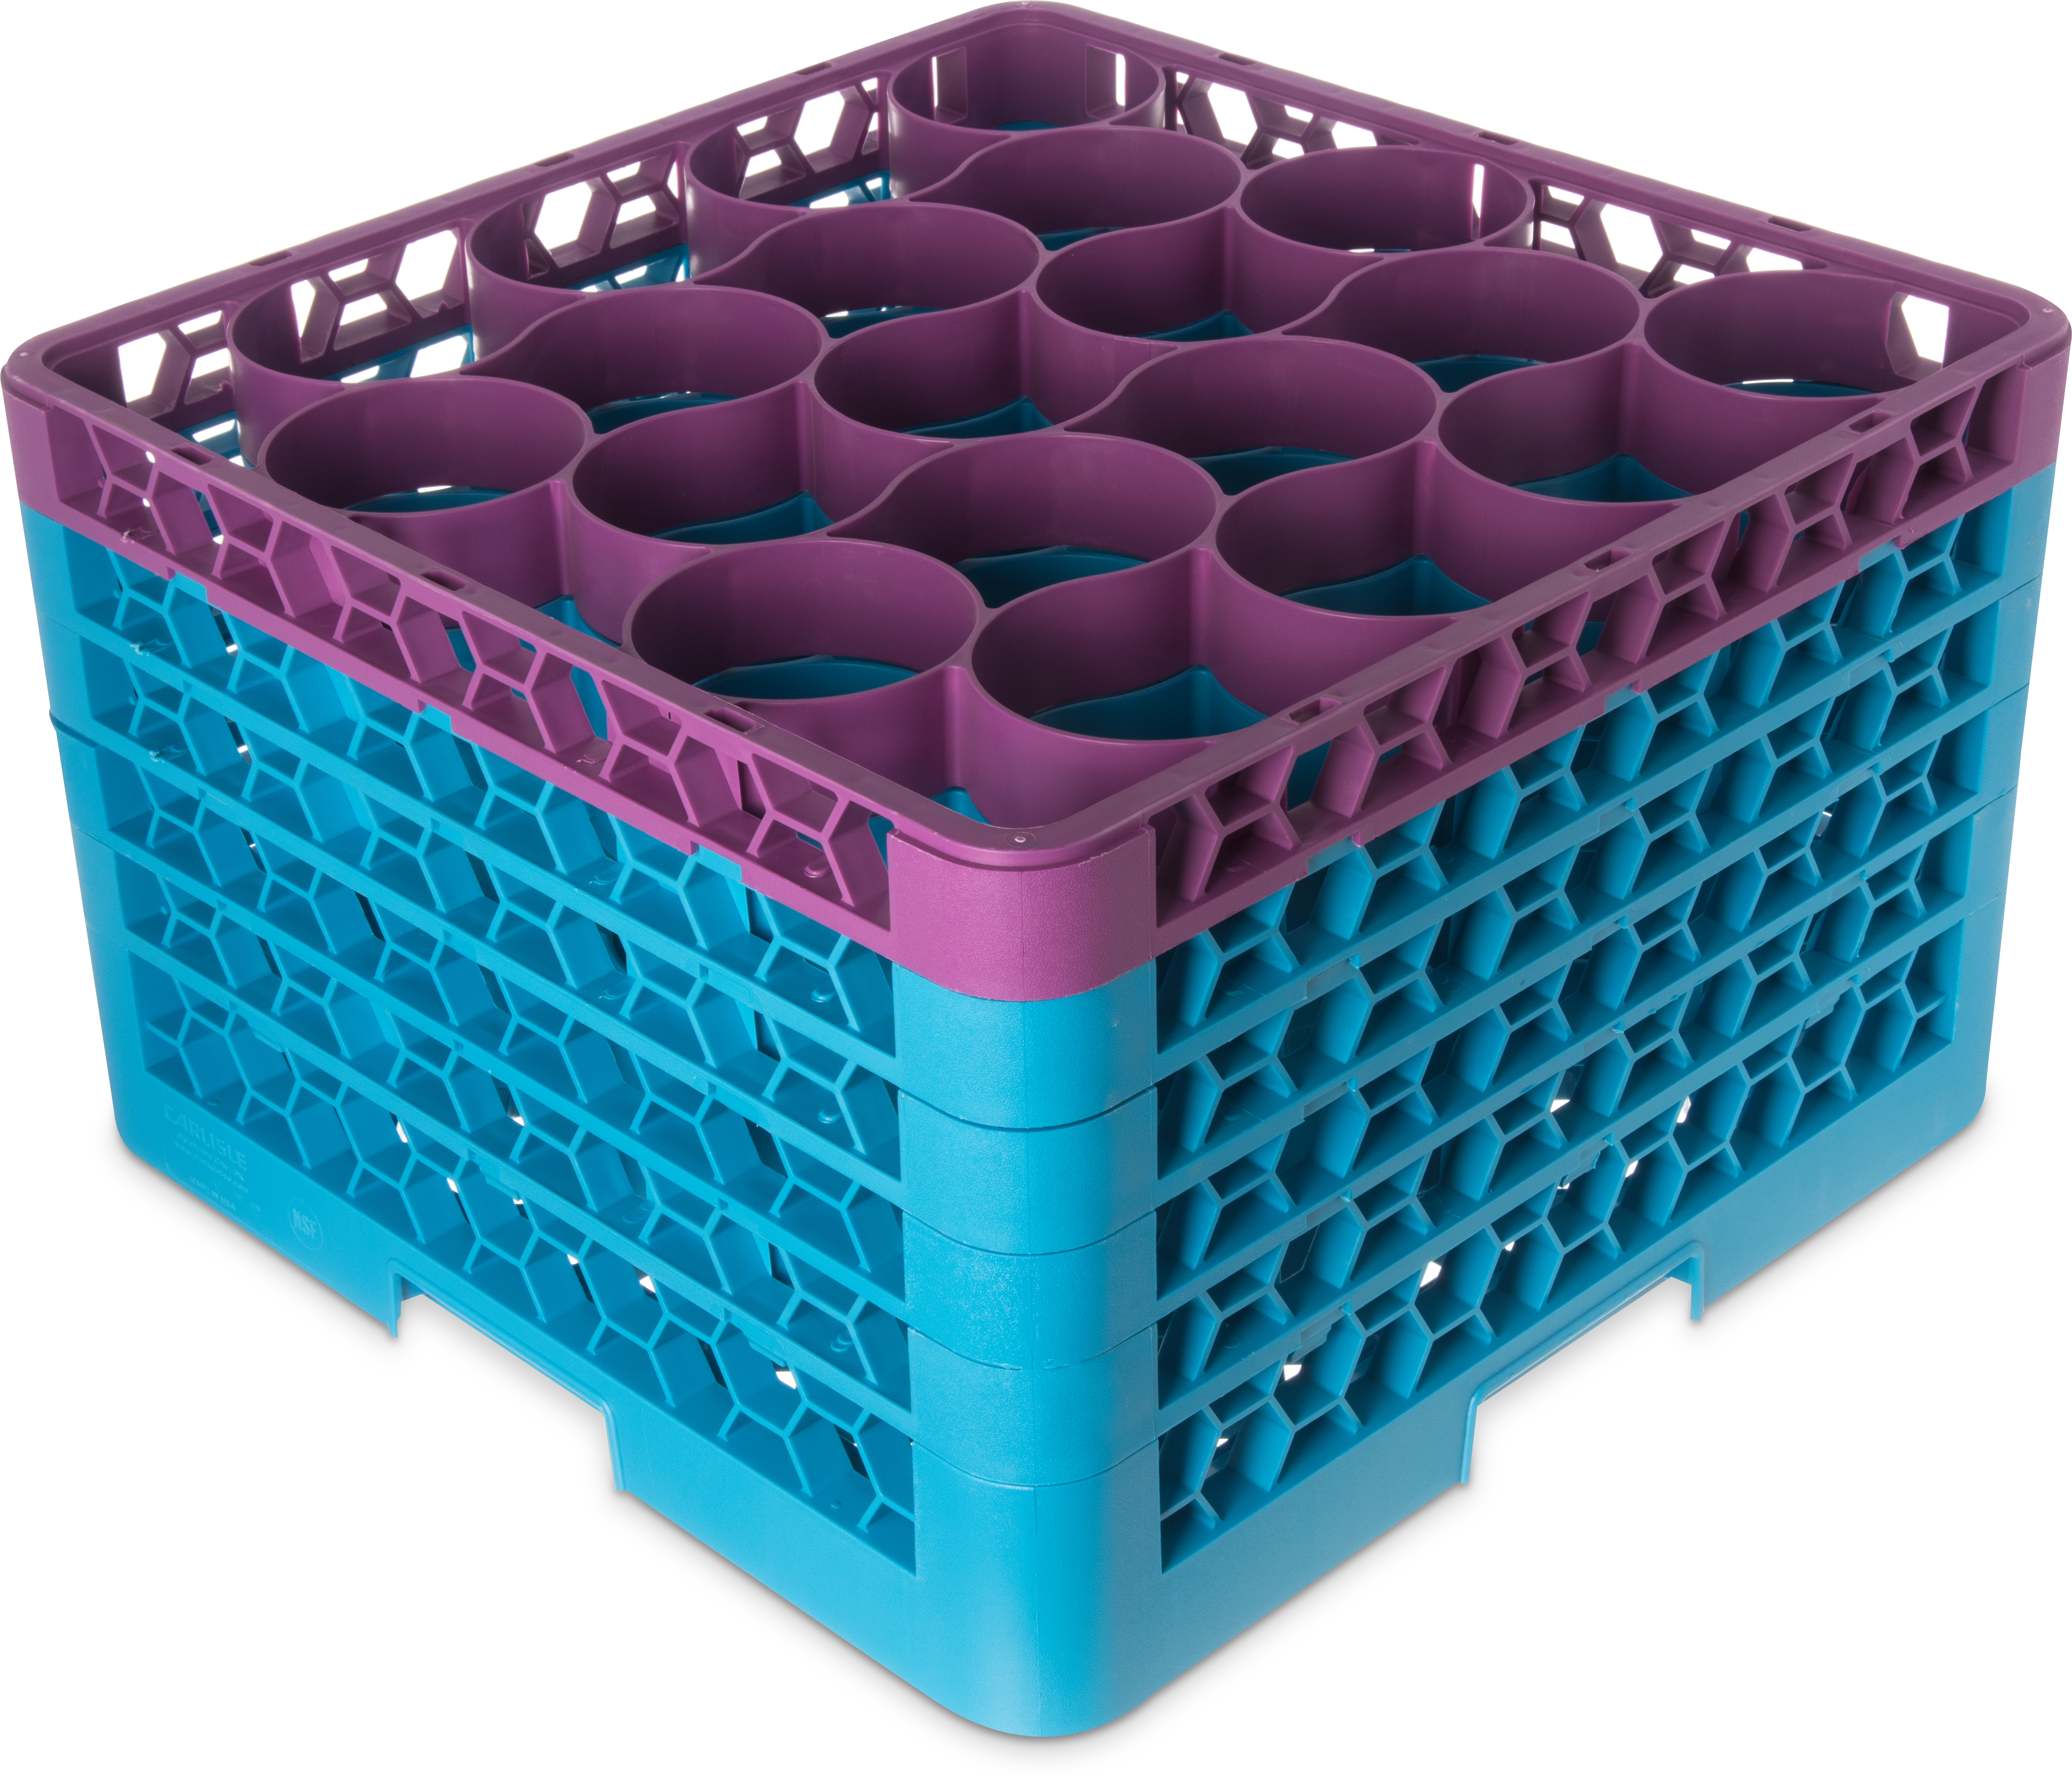 OptiClean NeWave Color-Coded Glass Rack with Five Extenders 20 Compartment - Lavender-Carlisle Blue